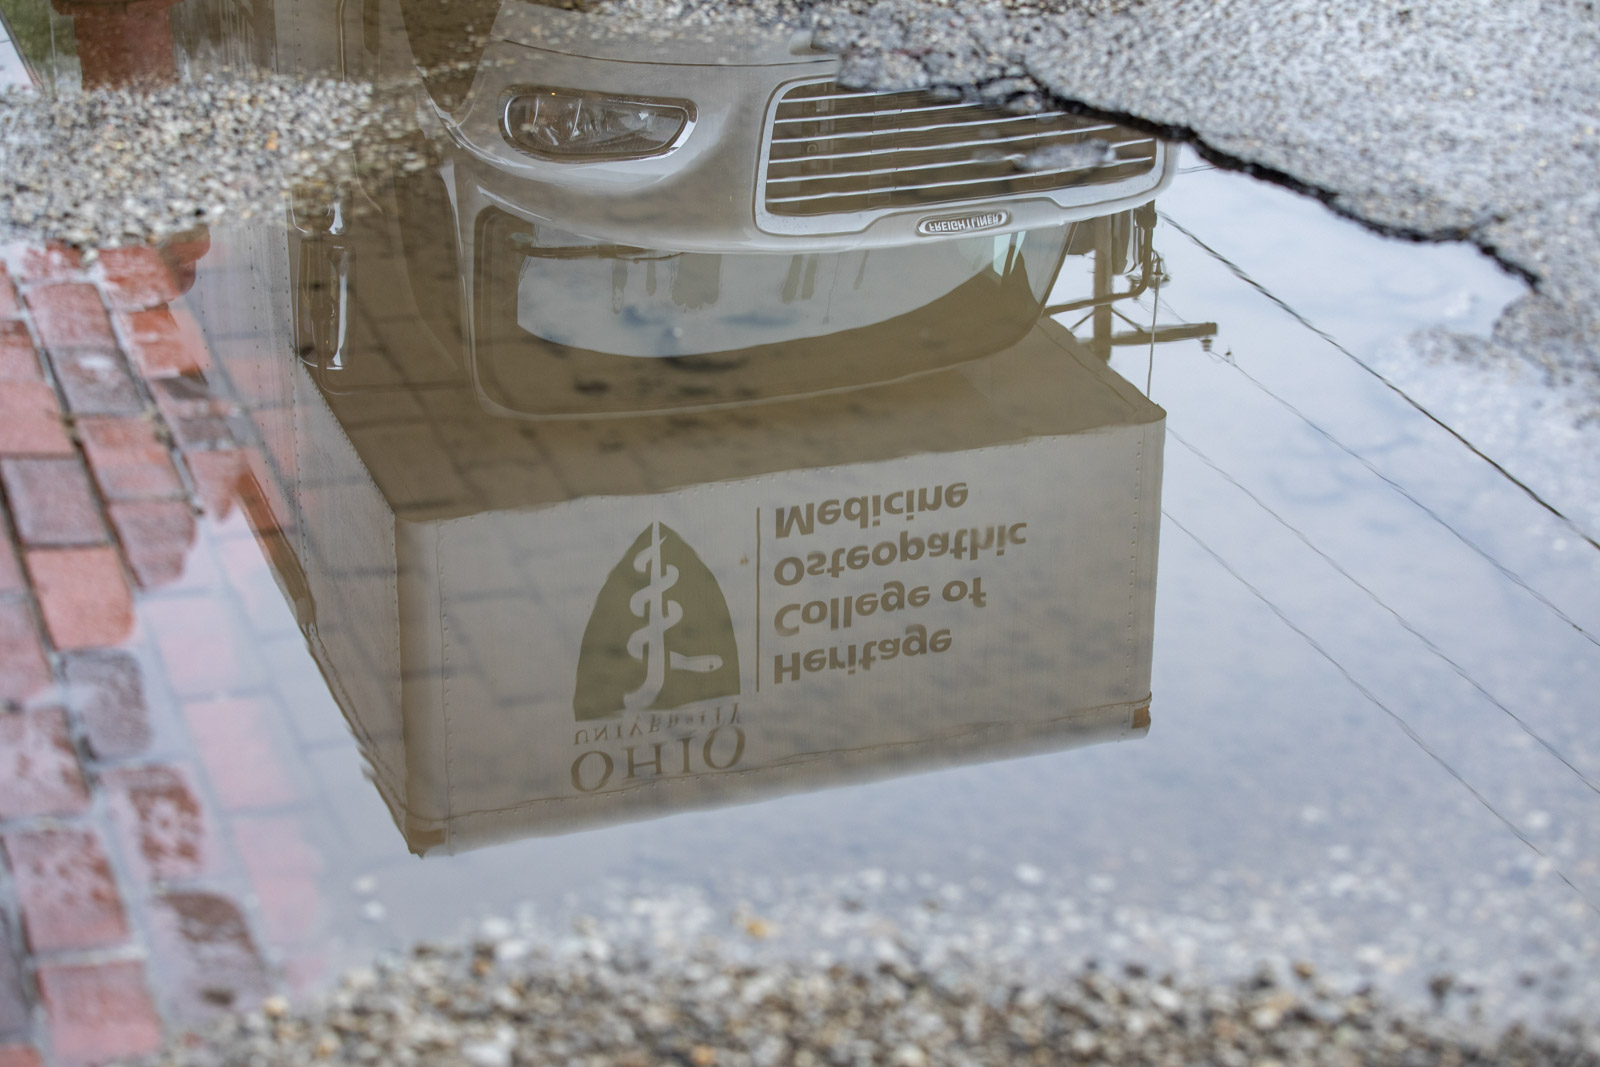 Reflection of mobile clinic in puddle